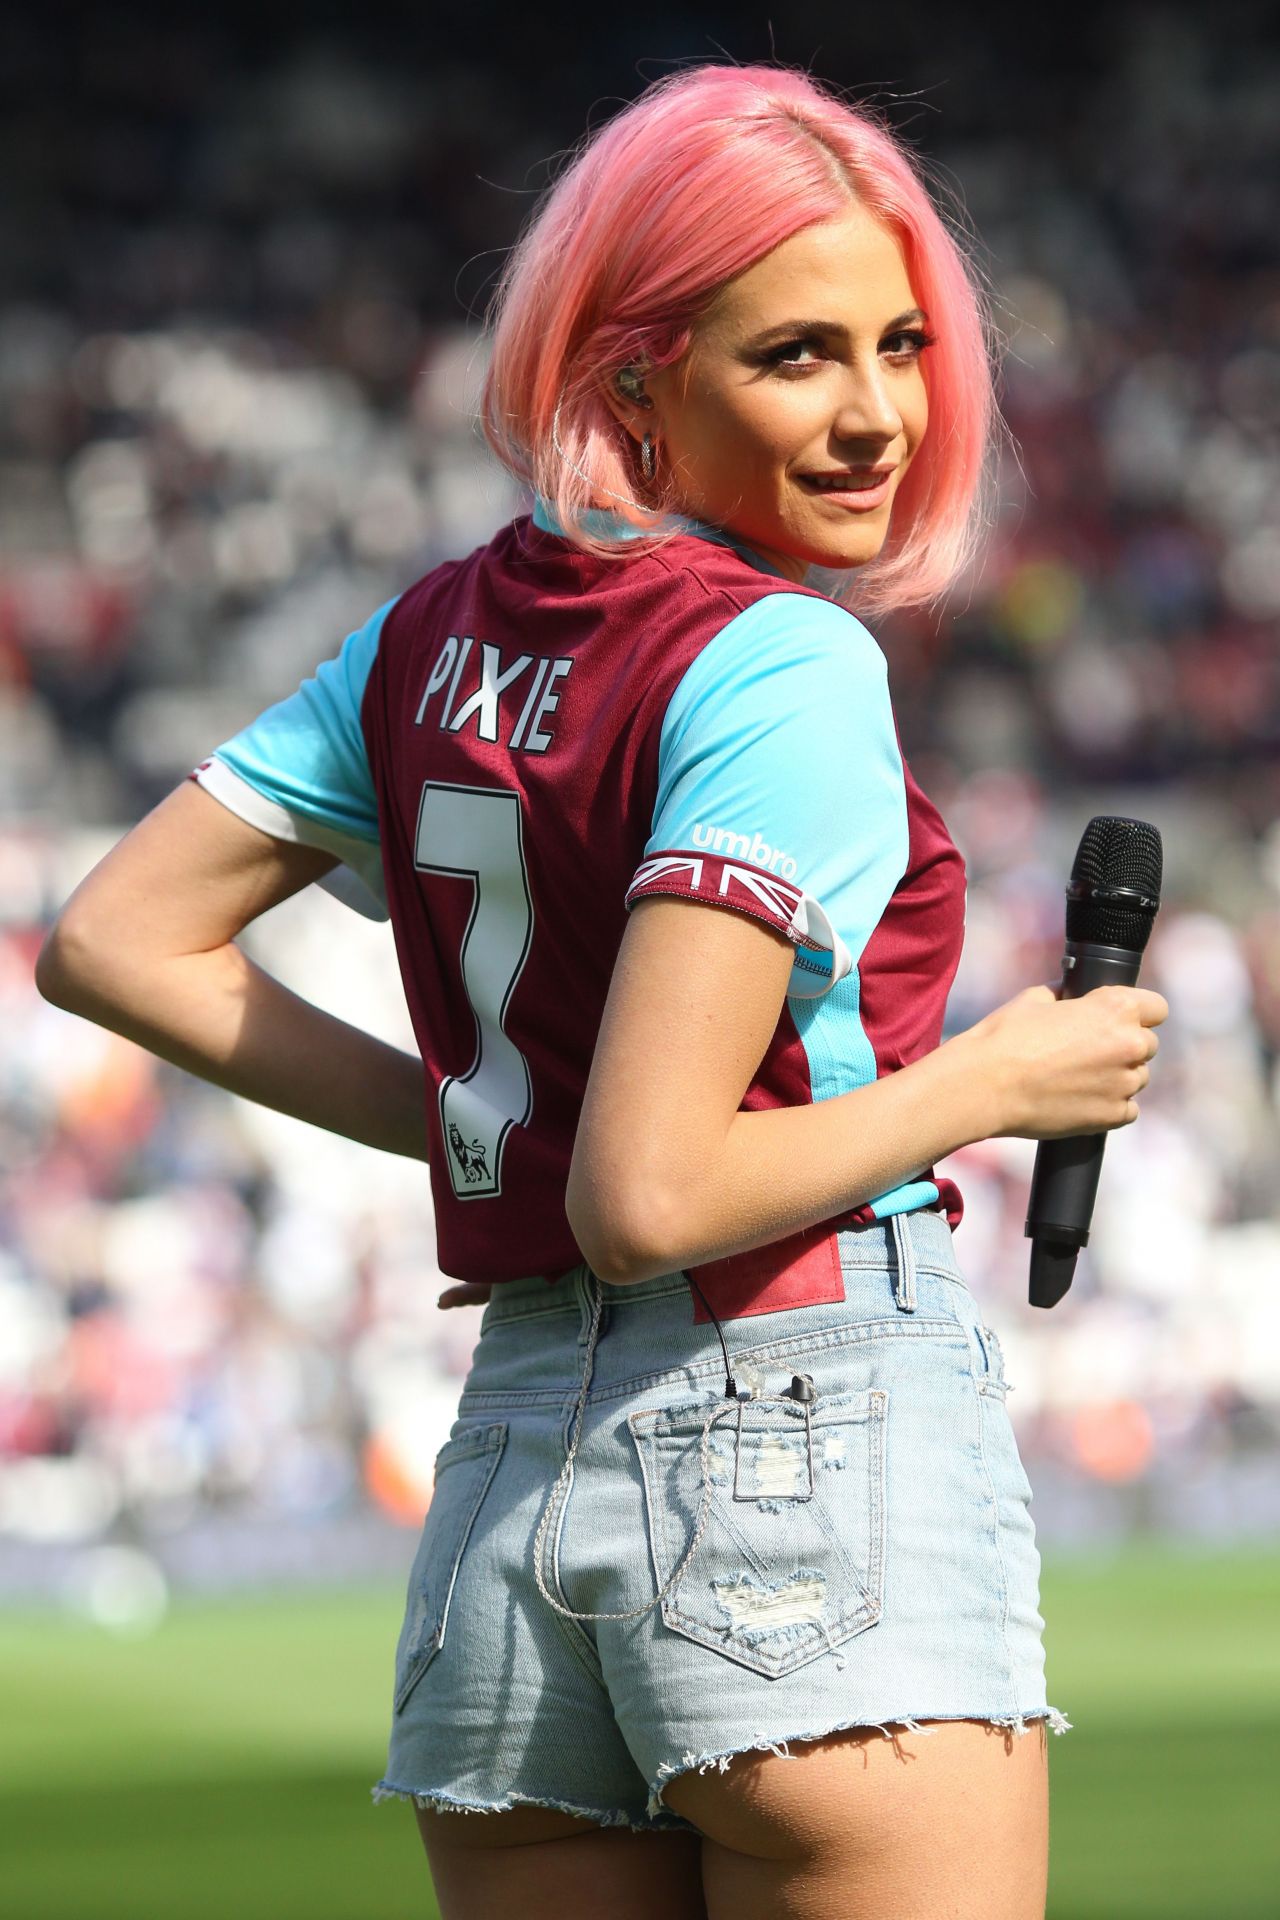 Pixie Lott Performing At Half Time In West Ham V Everton Football